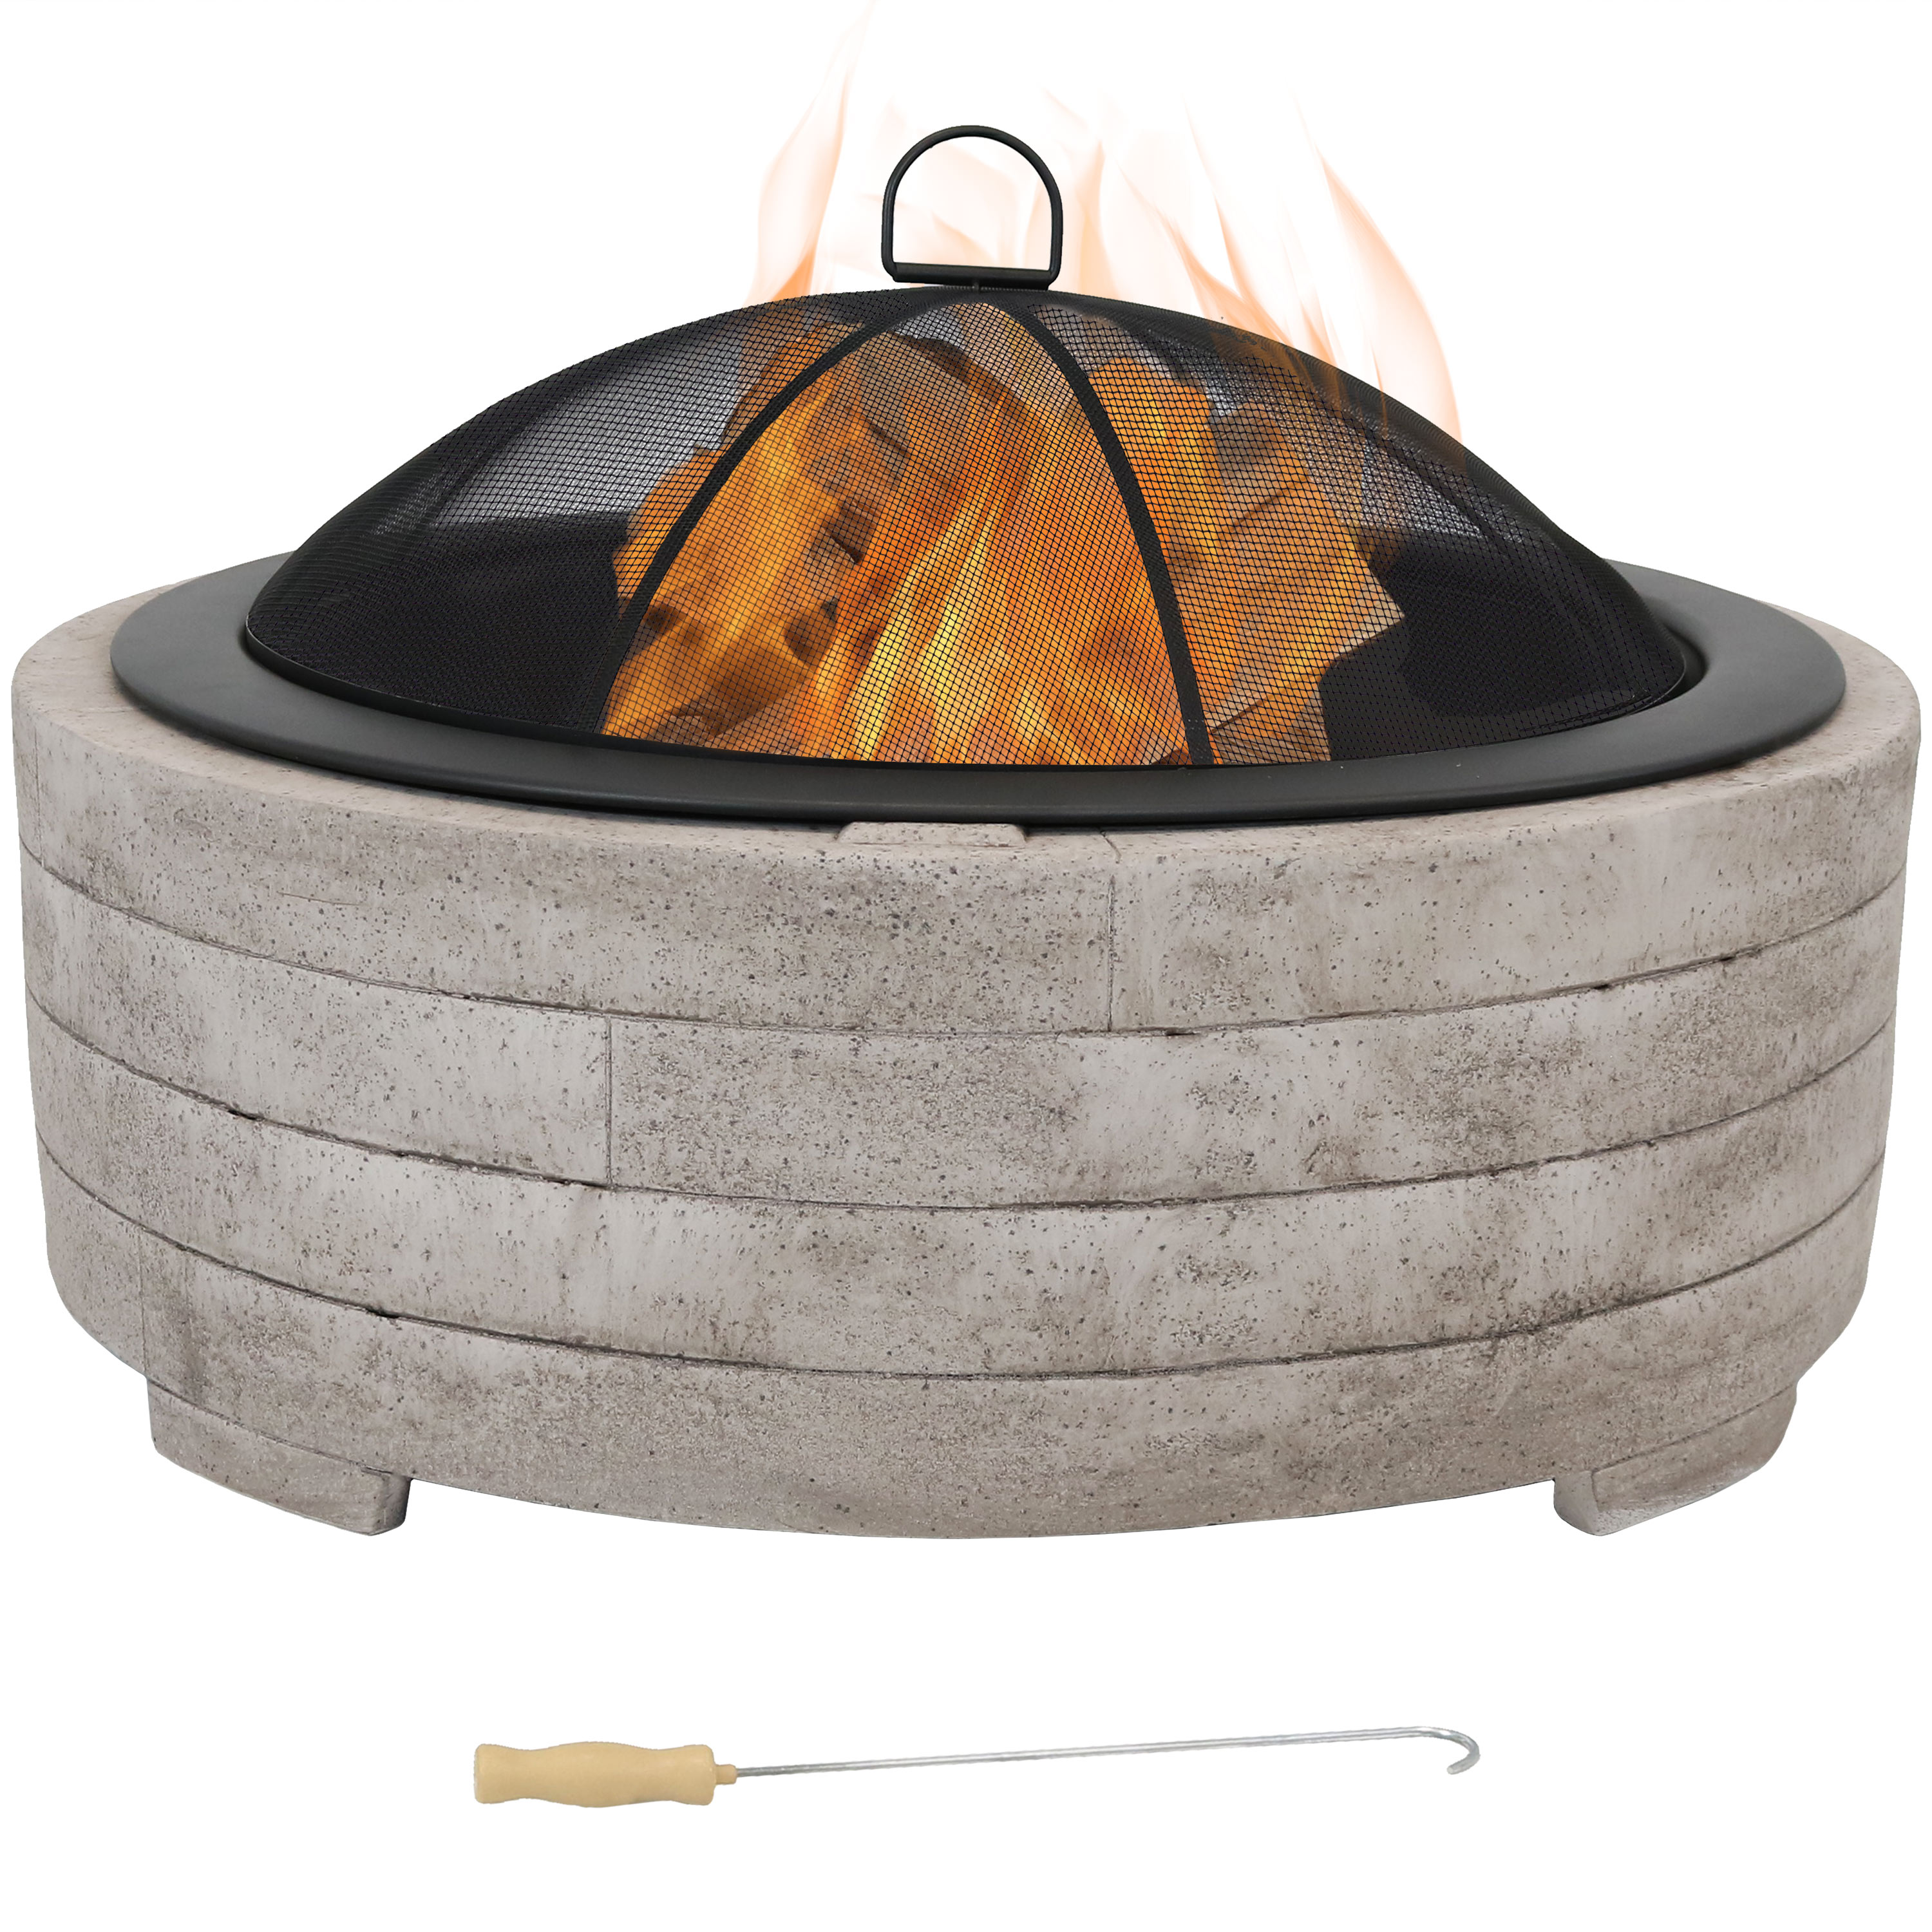 Sunnydaze Decor 35.75-in W Gray Cement Wood-Burning Fire Pit